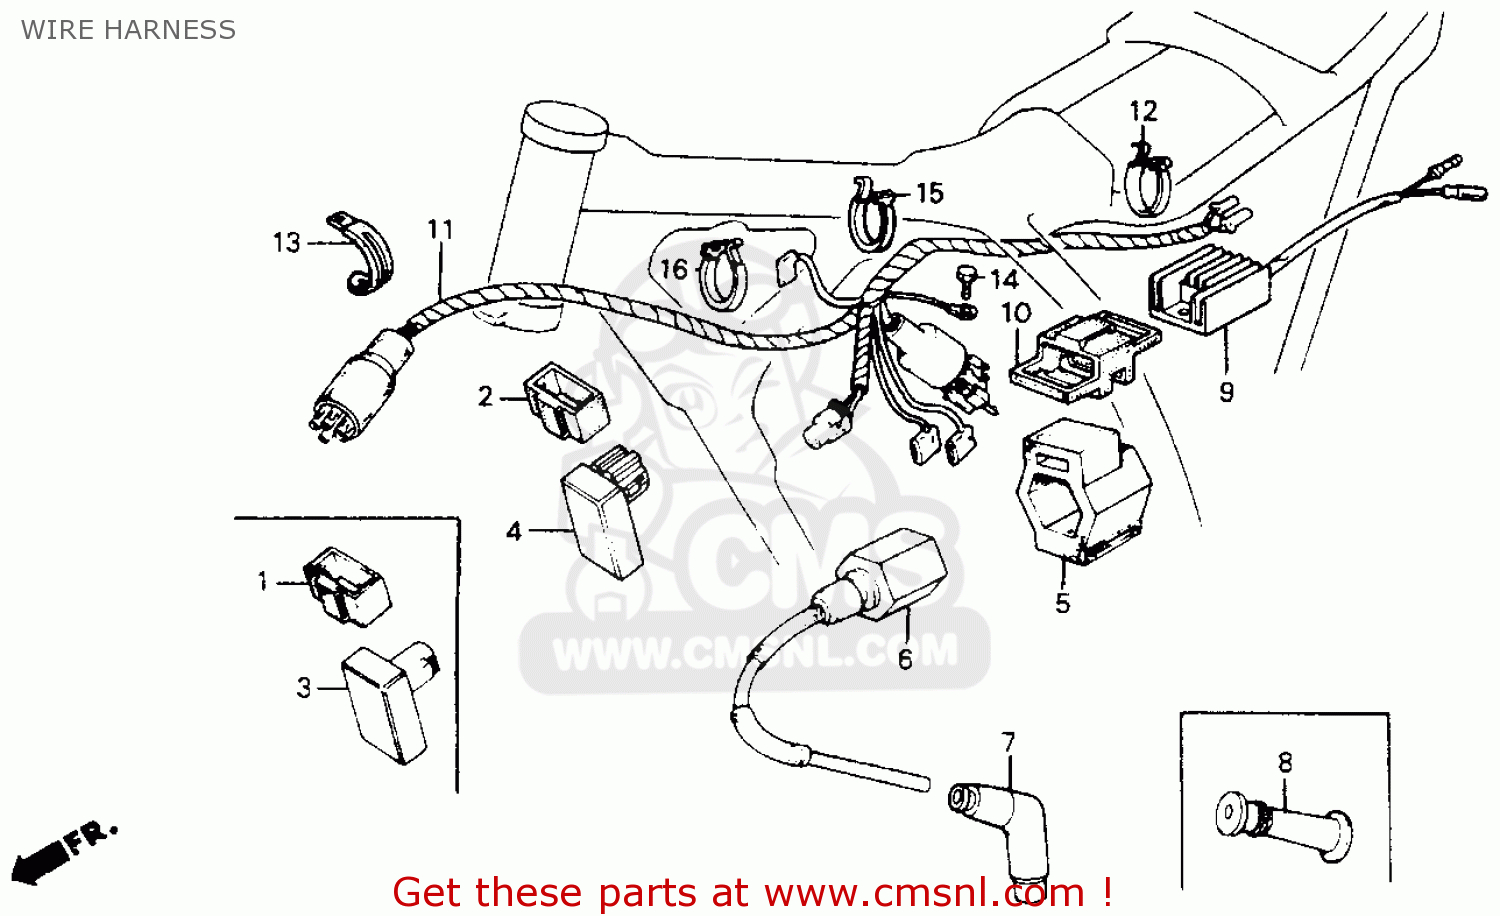 1997 Honda Engine Diagram | Wiring Library - Toggle Switch Wiring Diagram